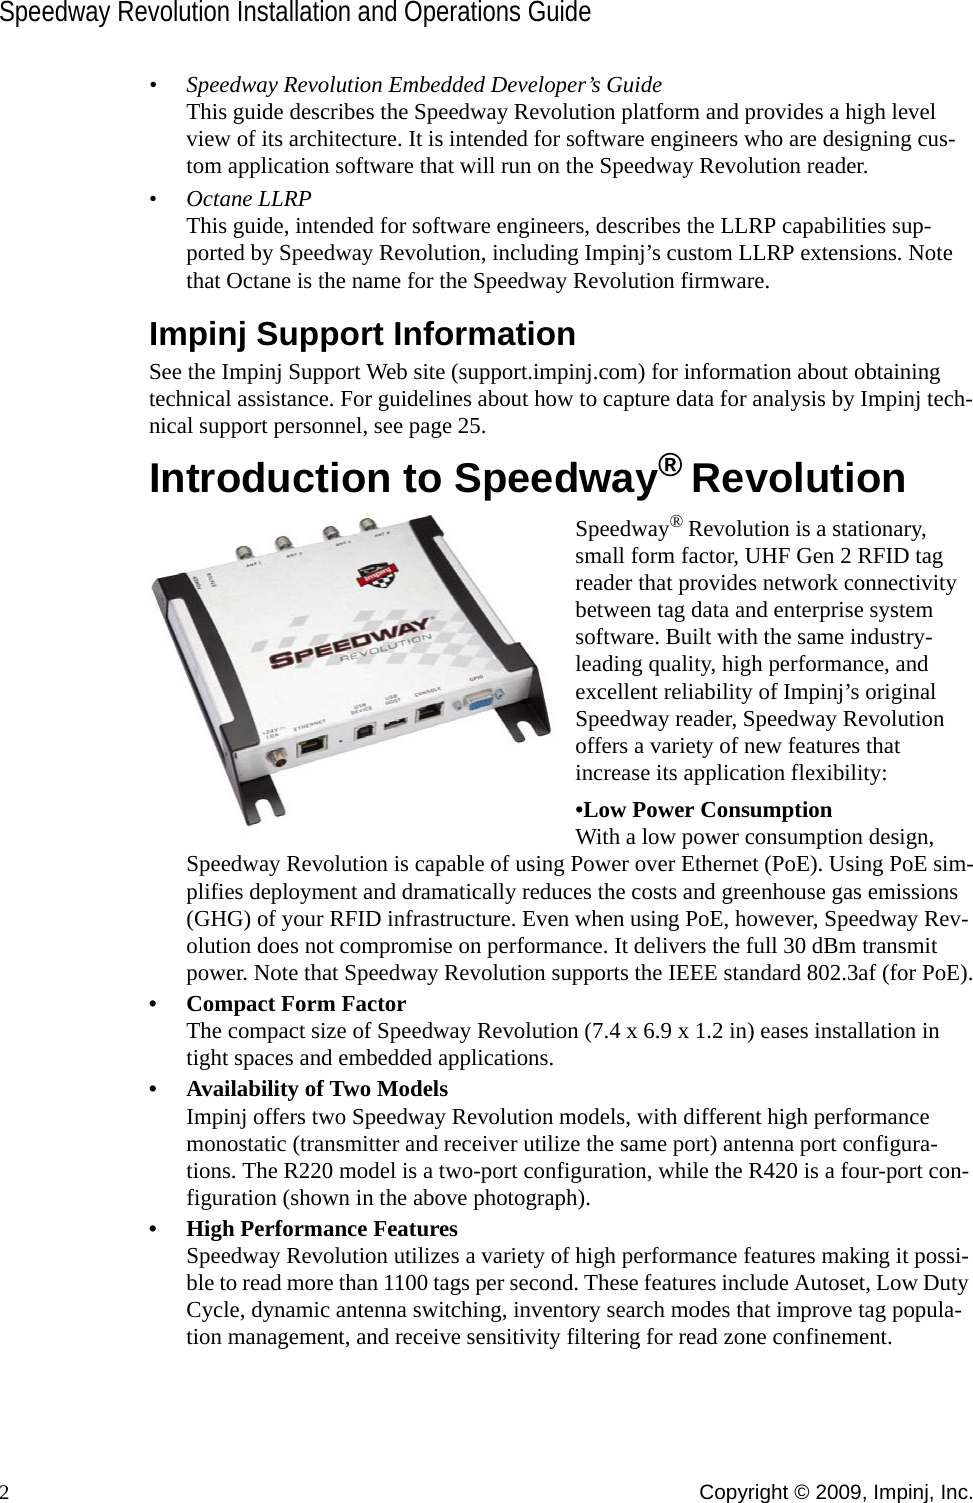 Speedway Revolution Installation and Operations Guide2Copyright © 2009, Impinj, Inc.• Speedway Revolution Embedded Developer’s GuideThis guide describes the Speedway Revolution platform and provides a high level view of its architecture. It is intended for software engineers who are designing cus-tom application software that will run on the Speedway Revolution reader.• Octane LLRPThis guide, intended for software engineers, describes the LLRP capabilities sup-ported by Speedway Revolution, including Impinj’s custom LLRP extensions. Note that Octane is the name for the Speedway Revolution firmware.Impinj Support InformationSee the Impinj Support Web site (support.impinj.com) for information about obtaining technical assistance. For guidelines about how to capture data for analysis by Impinj tech-nical support personnel, see page 25.Introduction to Speedway® RevolutionSpeedway® Revolution is a stationary, small form factor, UHF Gen 2 RFID tag reader that provides network connectivity between tag data and enterprise system software. Built with the same industry-leading quality, high performance, and excellent reliability of Impinj’s original Speedway reader, Speedway Revolution offers a variety of new features that increase its application flexibility:•Low Power ConsumptionWith a low power consumption design, Speedway Revolution is capable of using Power over Ethernet (PoE). Using PoE sim-plifies deployment and dramatically reduces the costs and greenhouse gas emissions (GHG) of your RFID infrastructure. Even when using PoE, however, Speedway Rev-olution does not compromise on performance. It delivers the full 30 dBm transmit power. Note that Speedway Revolution supports the IEEE standard 802.3af (for PoE).• Compact Form FactorThe compact size of Speedway Revolution (7.4 x 6.9 x 1.2 in) eases installation in tight spaces and embedded applications. • Availability of Two ModelsImpinj offers two Speedway Revolution models, with different high performance monostatic (transmitter and receiver utilize the same port) antenna port configura-tions. The R220 model is a two-port configuration, while the R420 is a four-port con-figuration (shown in the above photograph). • High Performance FeaturesSpeedway Revolution utilizes a variety of high performance features making it possi-ble to read more than 1100 tags per second. These features include Autoset, Low Duty Cycle, dynamic antenna switching, inventory search modes that improve tag popula-tion management, and receive sensitivity filtering for read zone confinement.